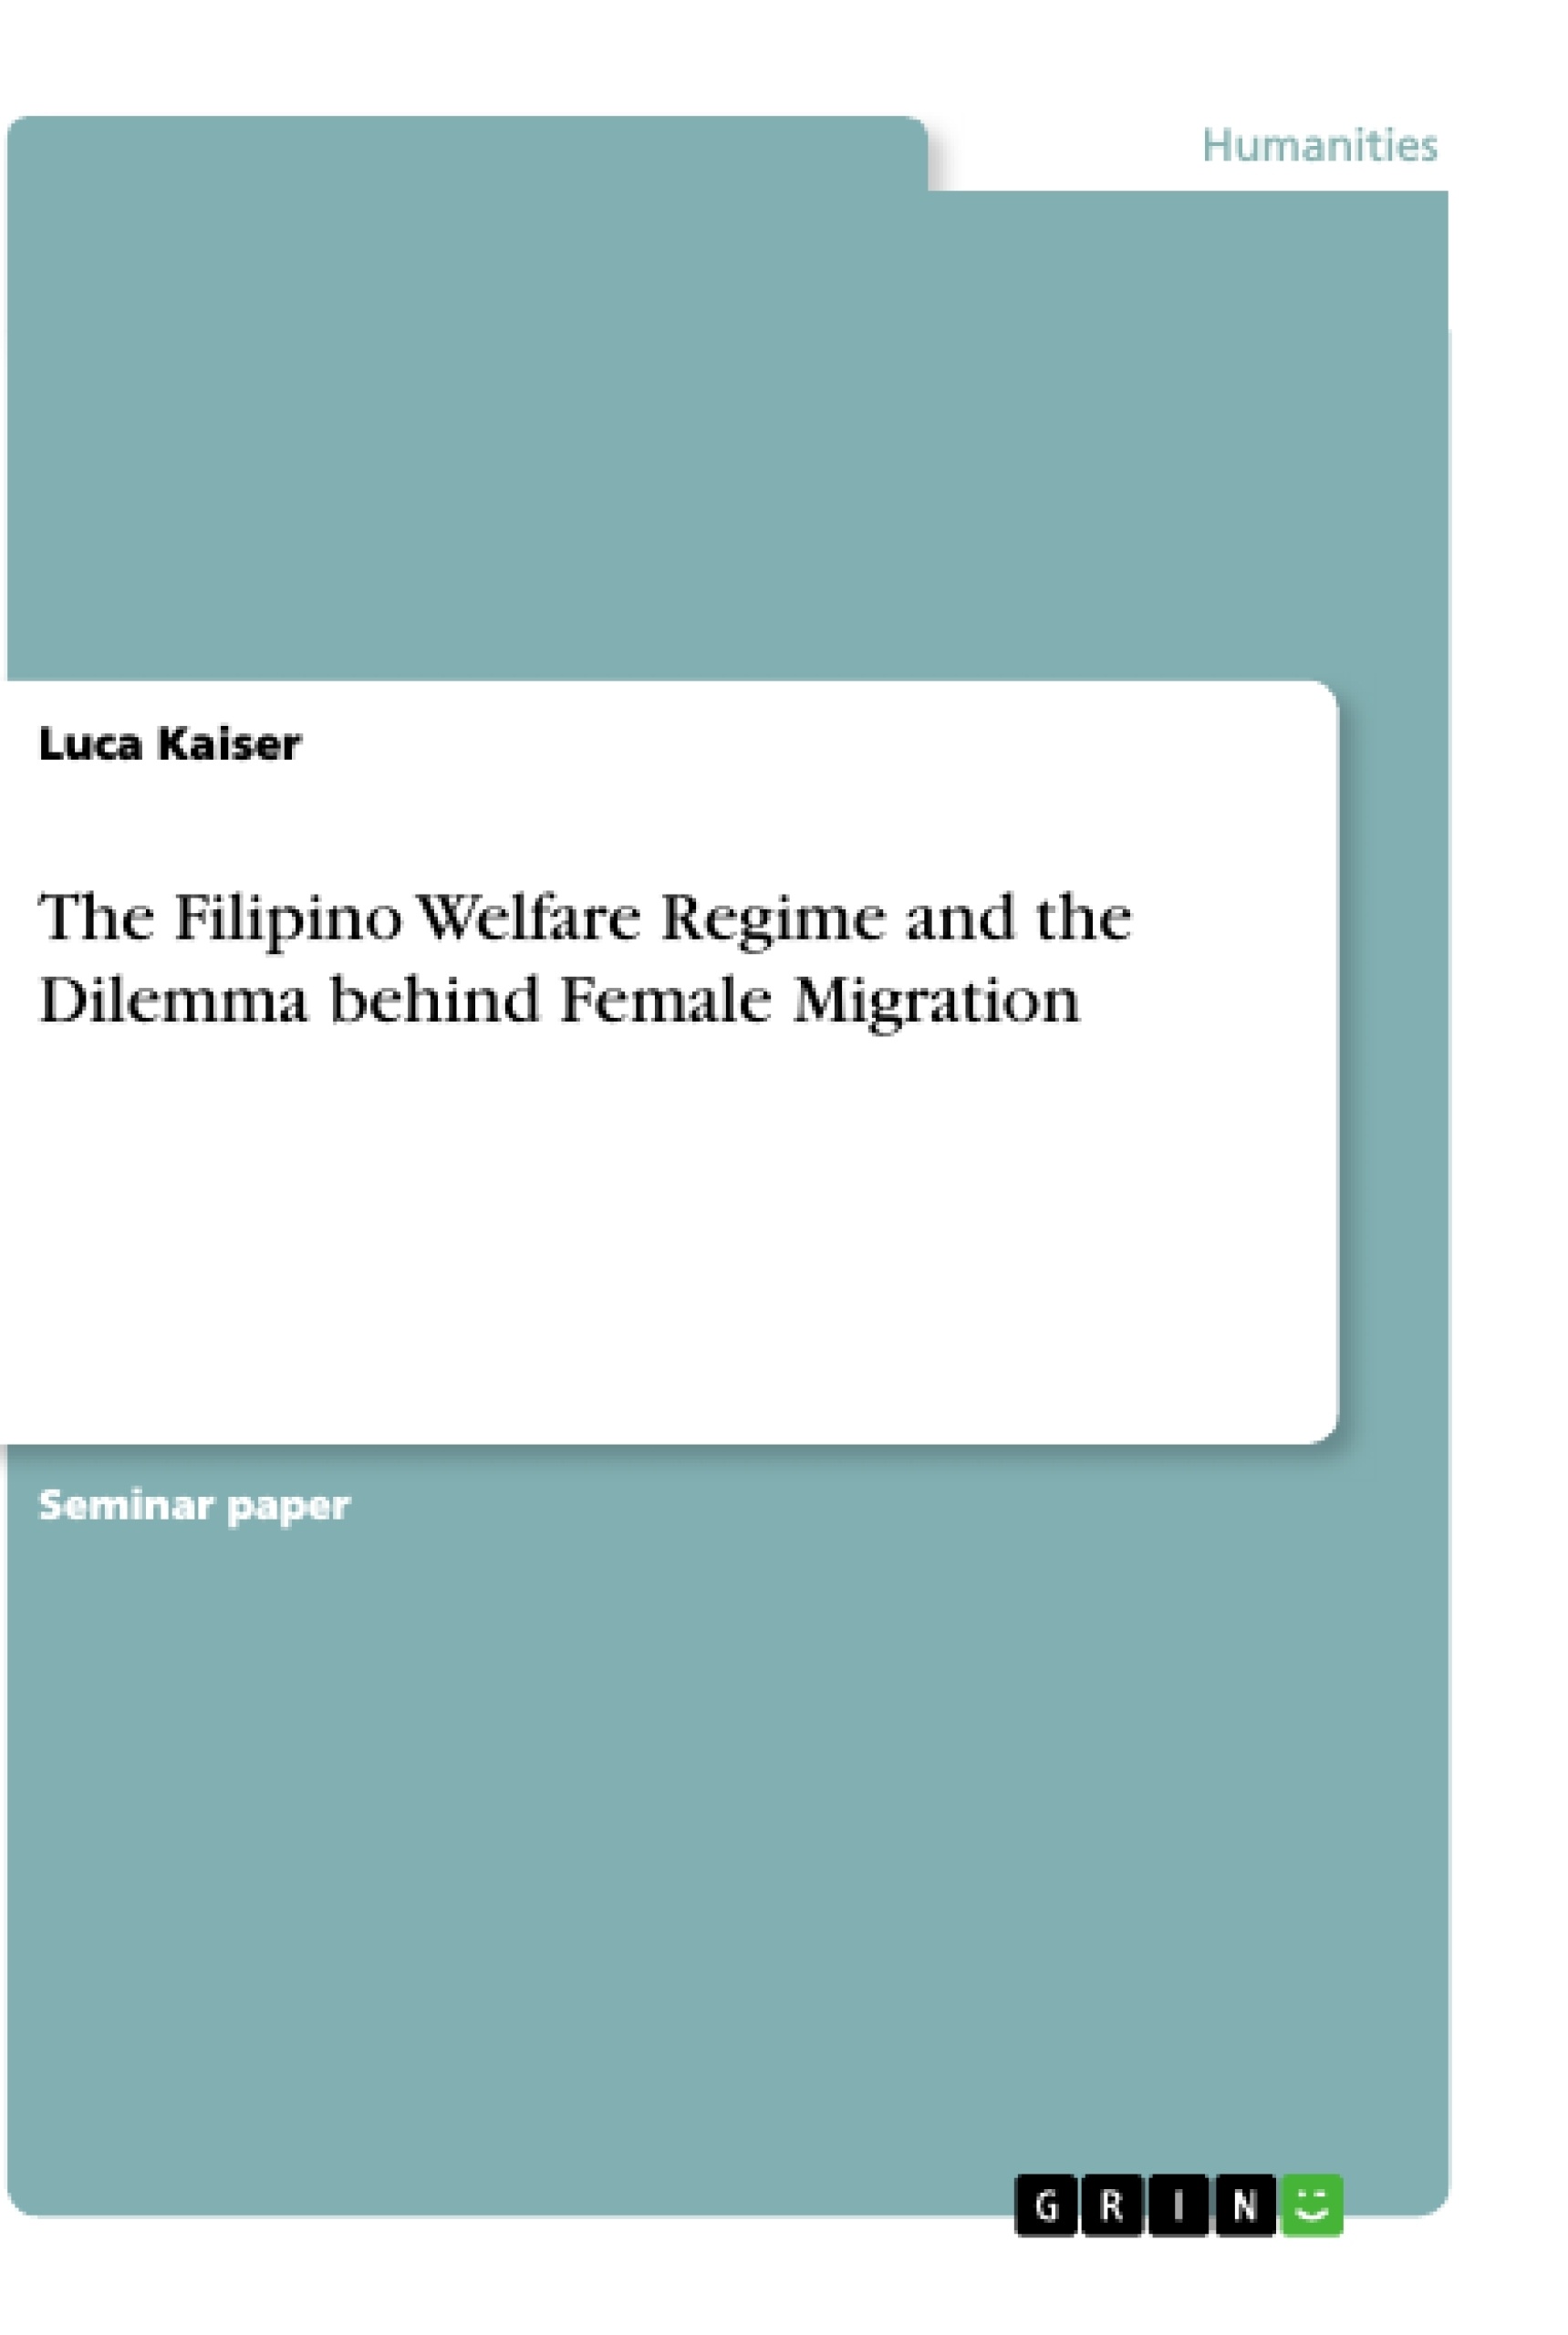 Título: The Filipino Welfare Regime and the Dilemma behind Female Migration